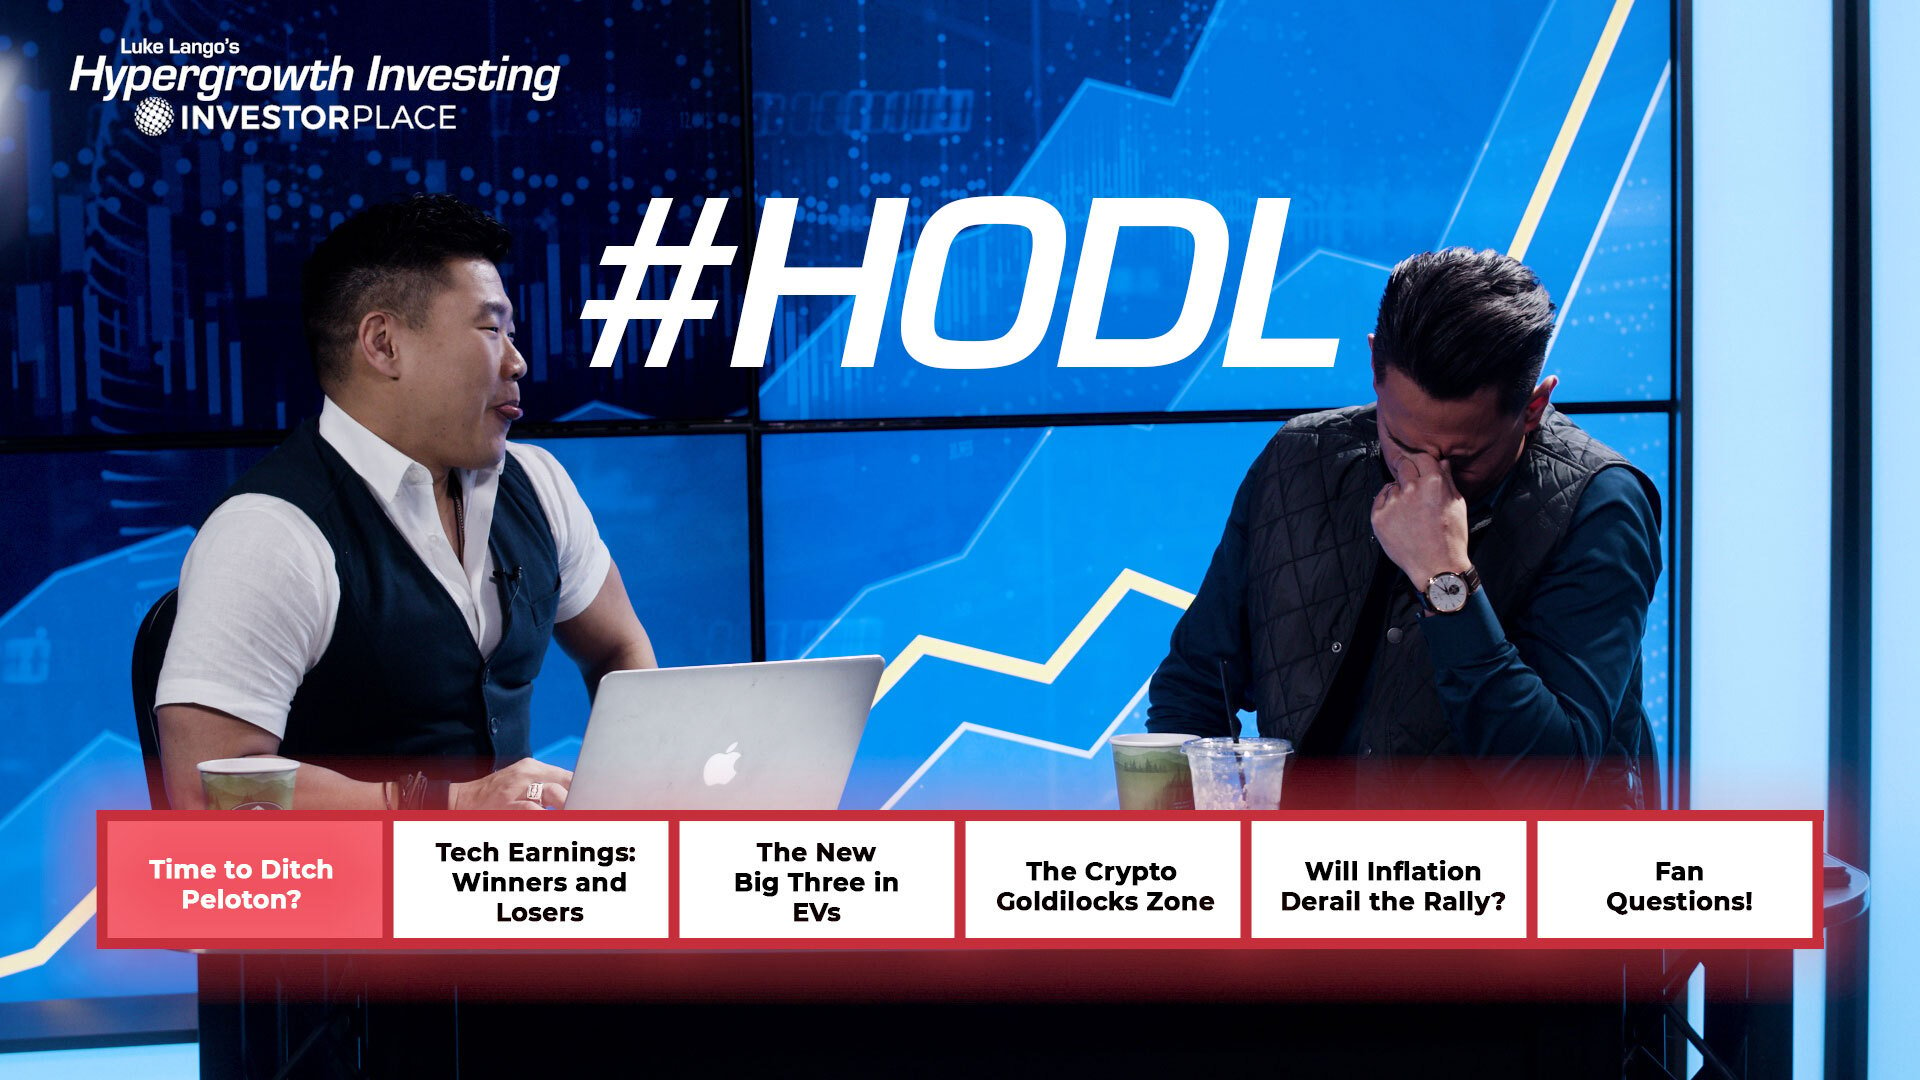 Thumbnail for the Youtube video, "Is Peloton Stock a Bust? Plus: Tech Earnings, Crypto Regulation, and a New “'Big Three'” in EVs" published by Hypergrowth Investing